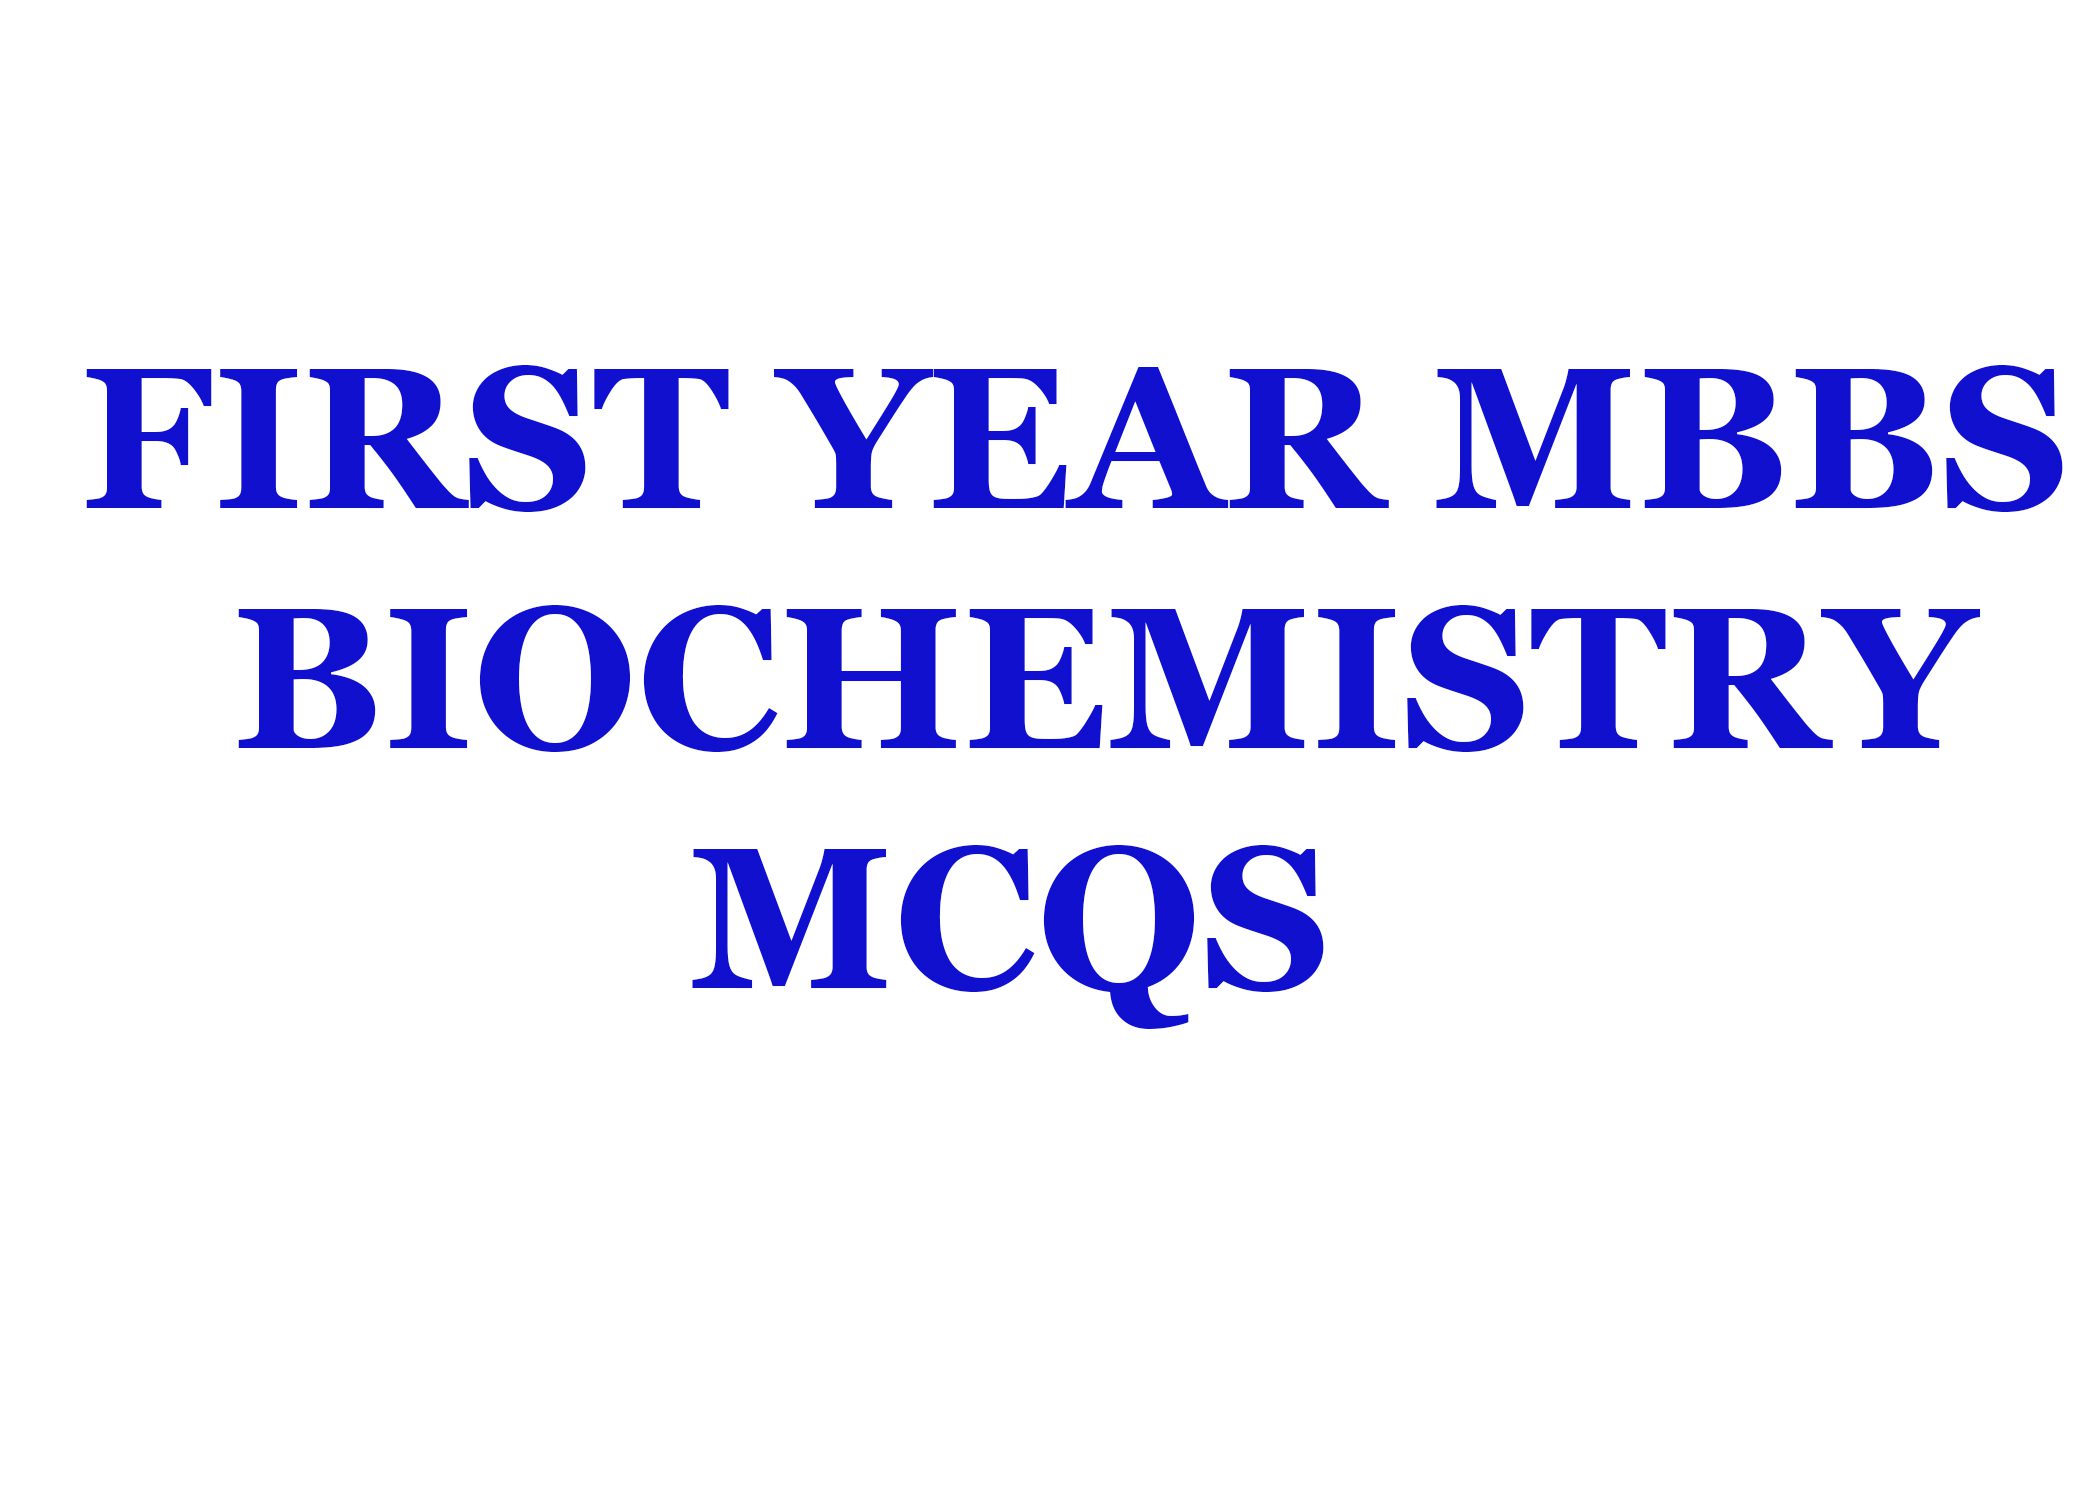 Biochemistry mcqs for first year mbbs